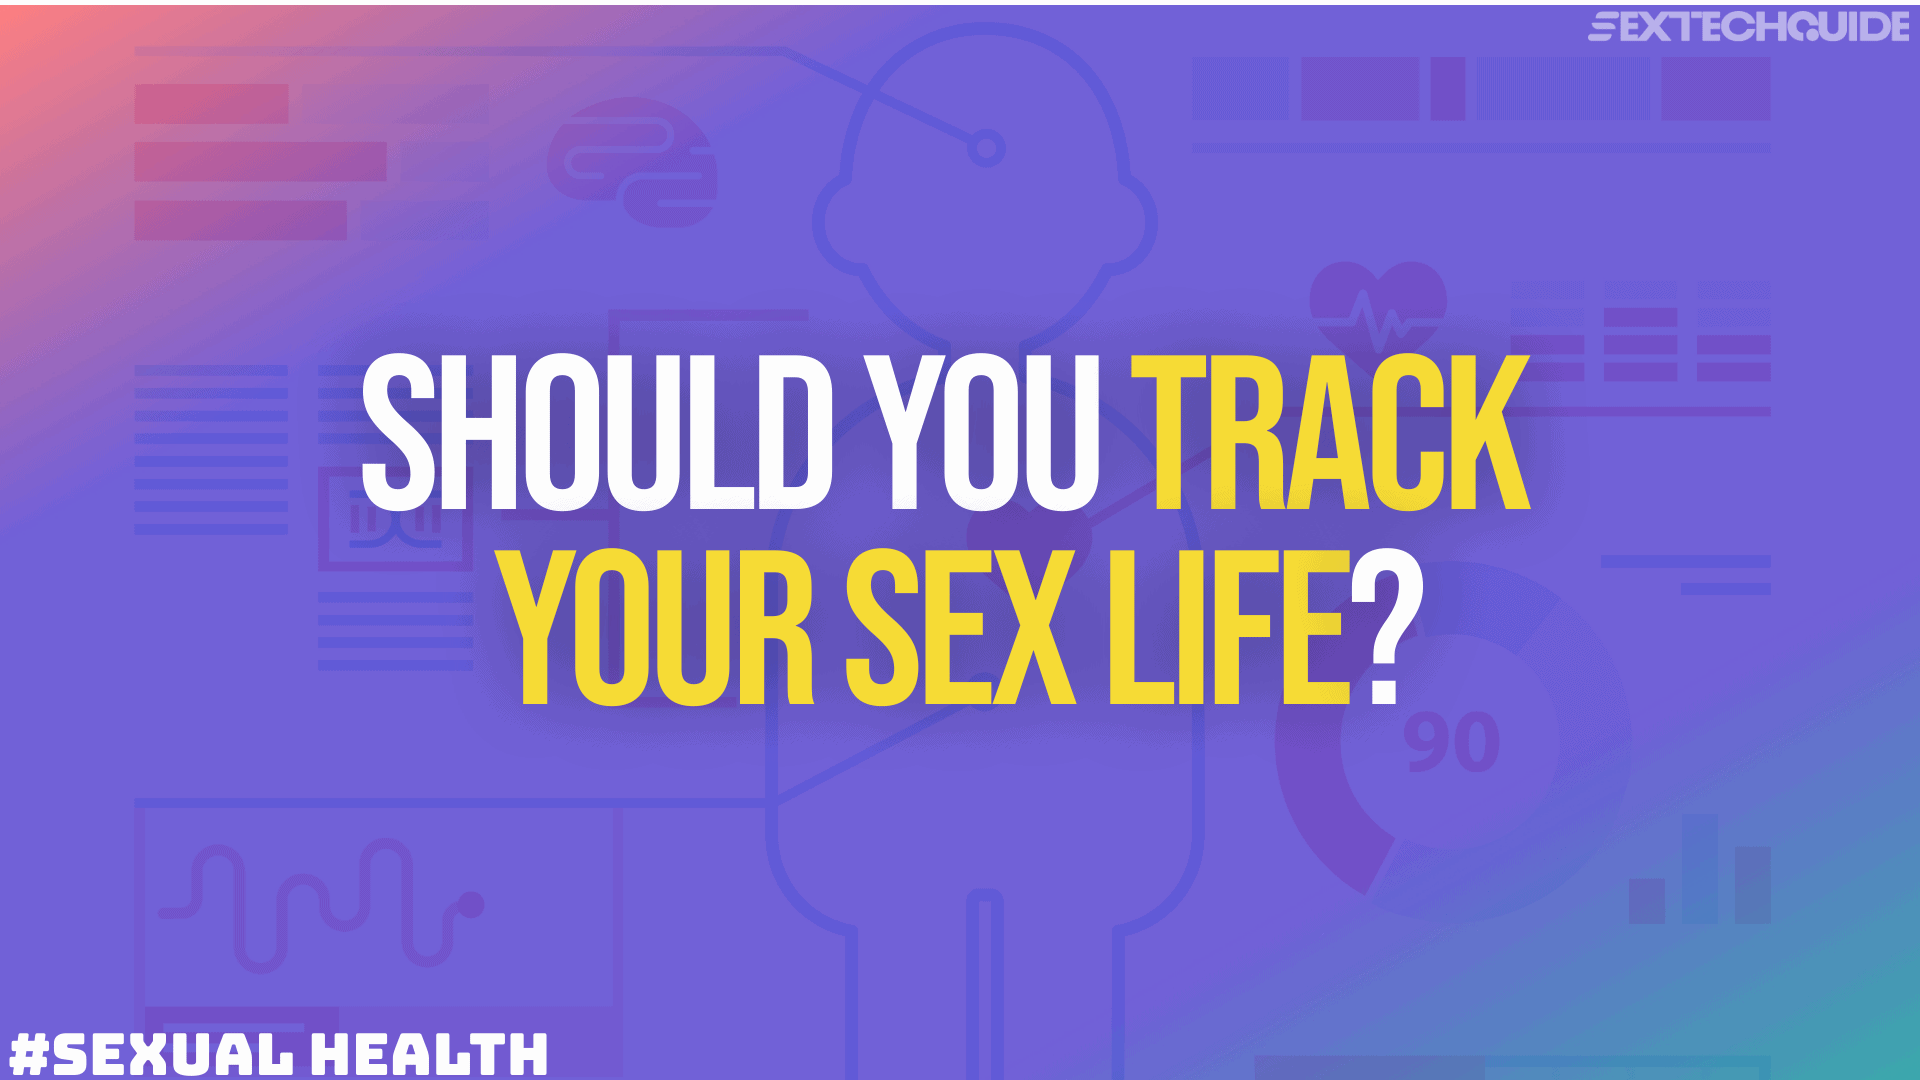 Tracking your sex life